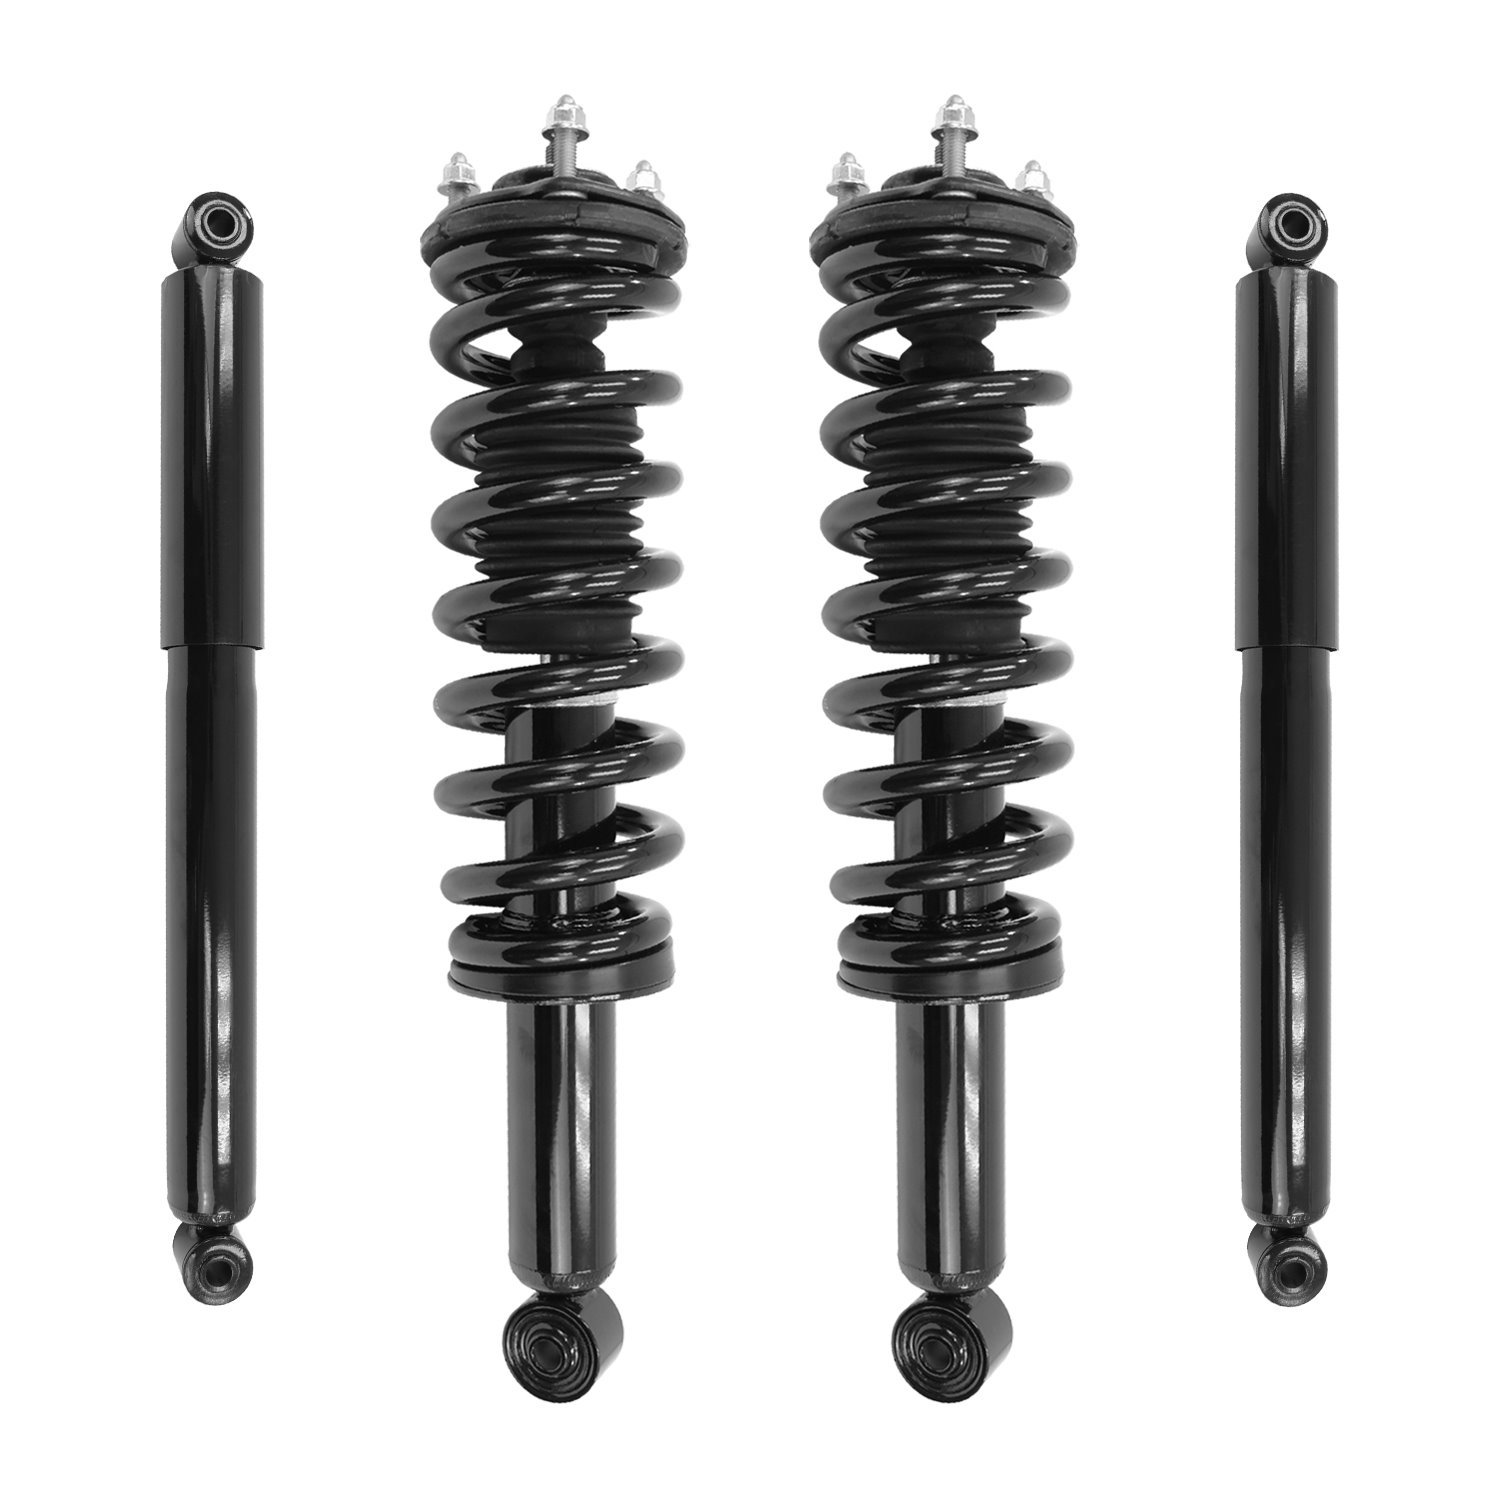 4-13550-251370-001 Front & Rear Complete Strut Assembly Shock Absorber Kit Fits Select Chevy Colorado, GMC Canyon